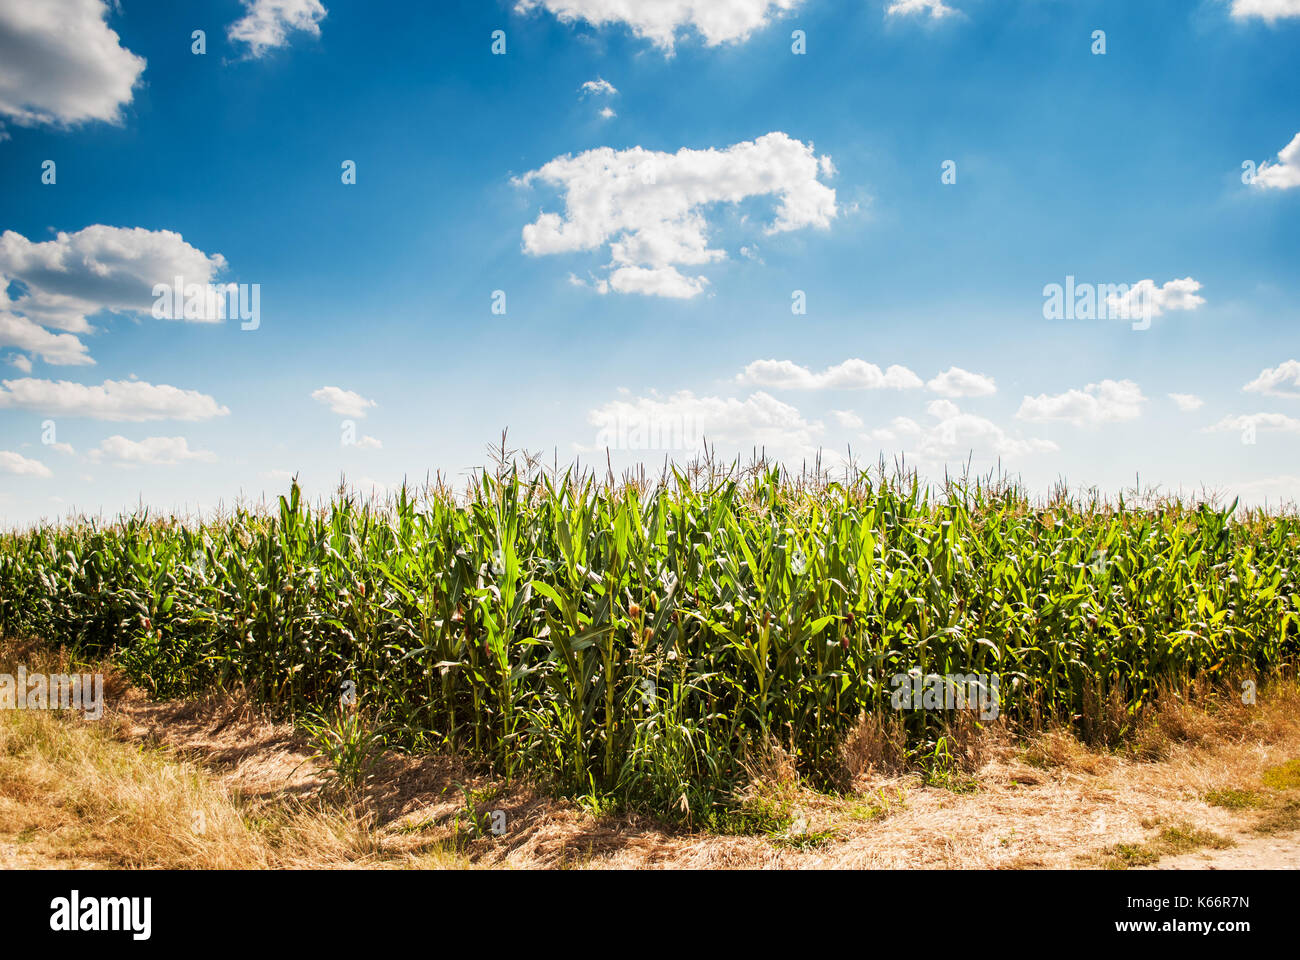 Corn field in the countryside Stock Photo